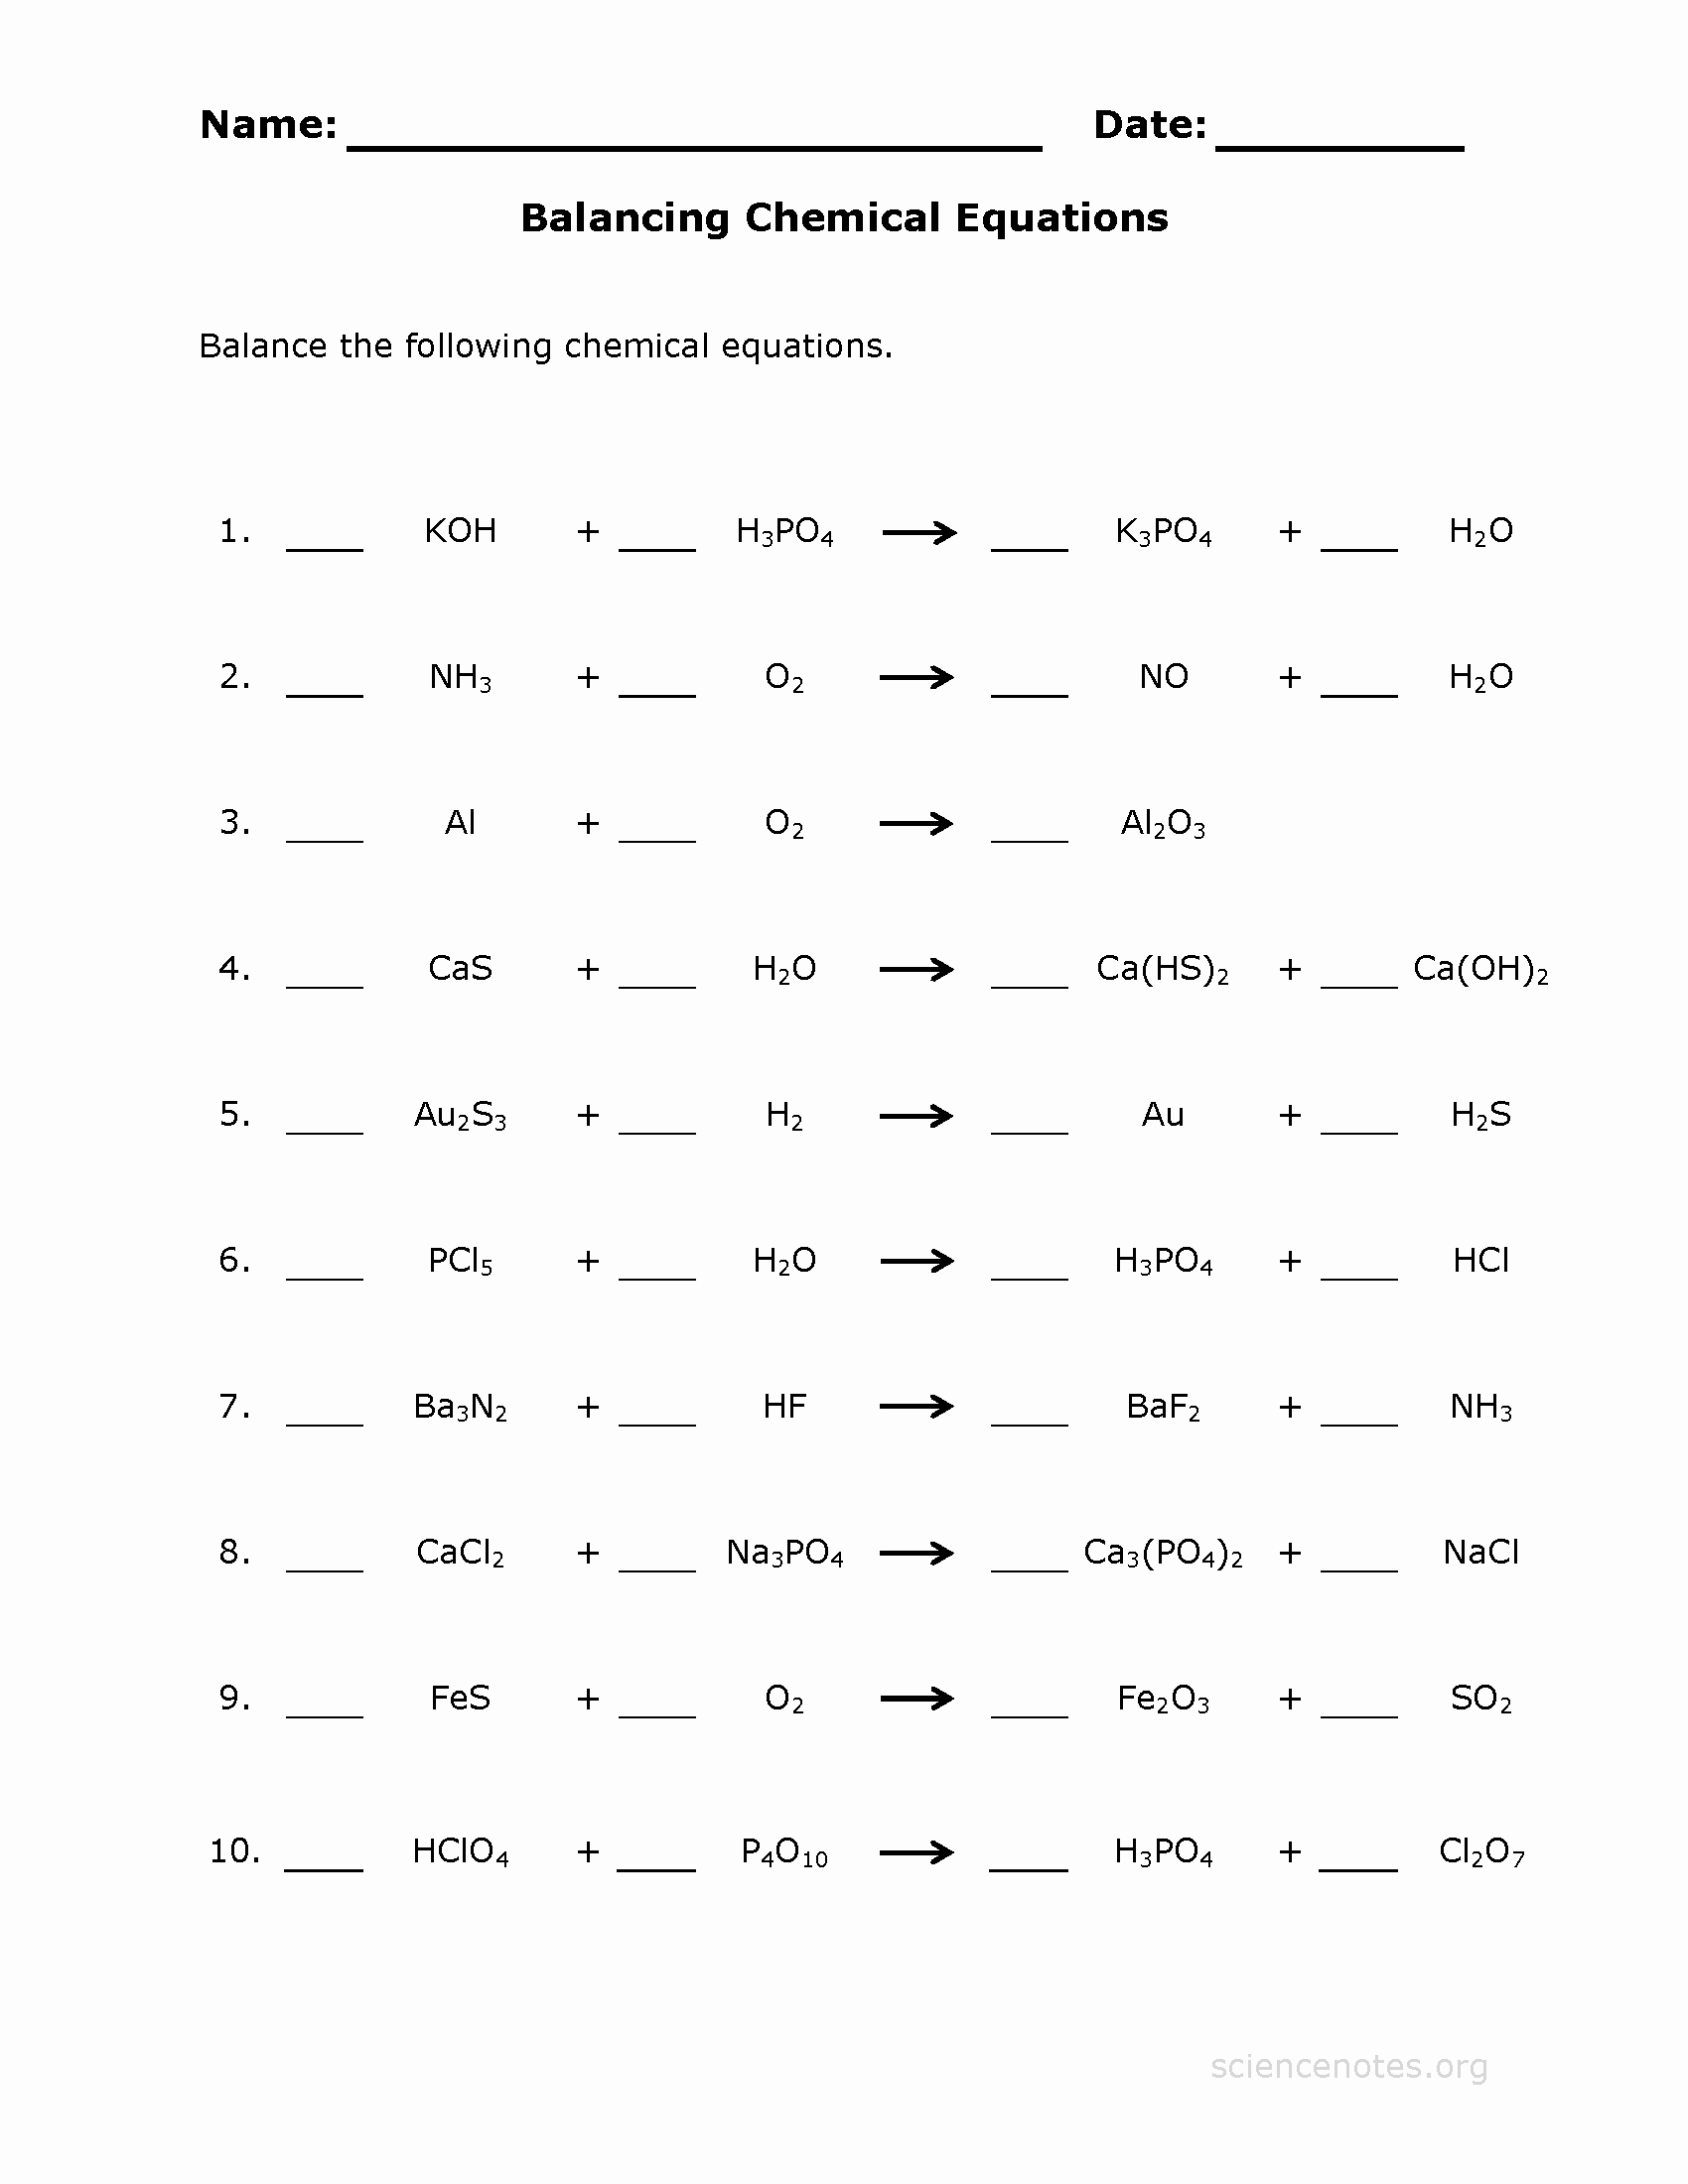 Balancing Equations Practice Worksheet Answers Awesome Balancing Chemical Equations Practice Sheet